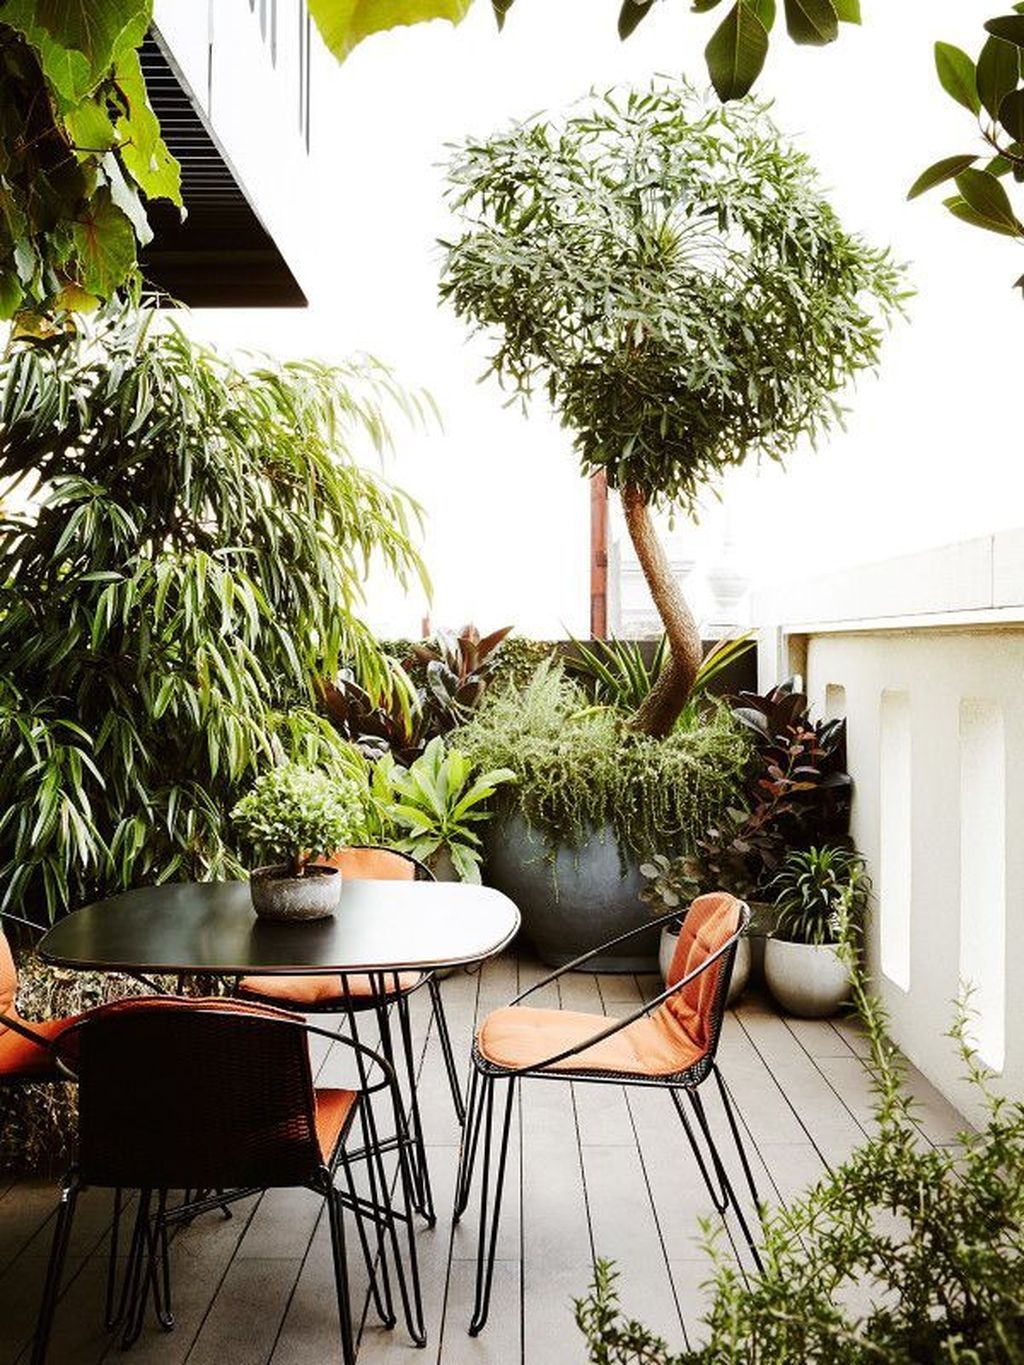 Most Popular And Beautiful Rooftop Garden18